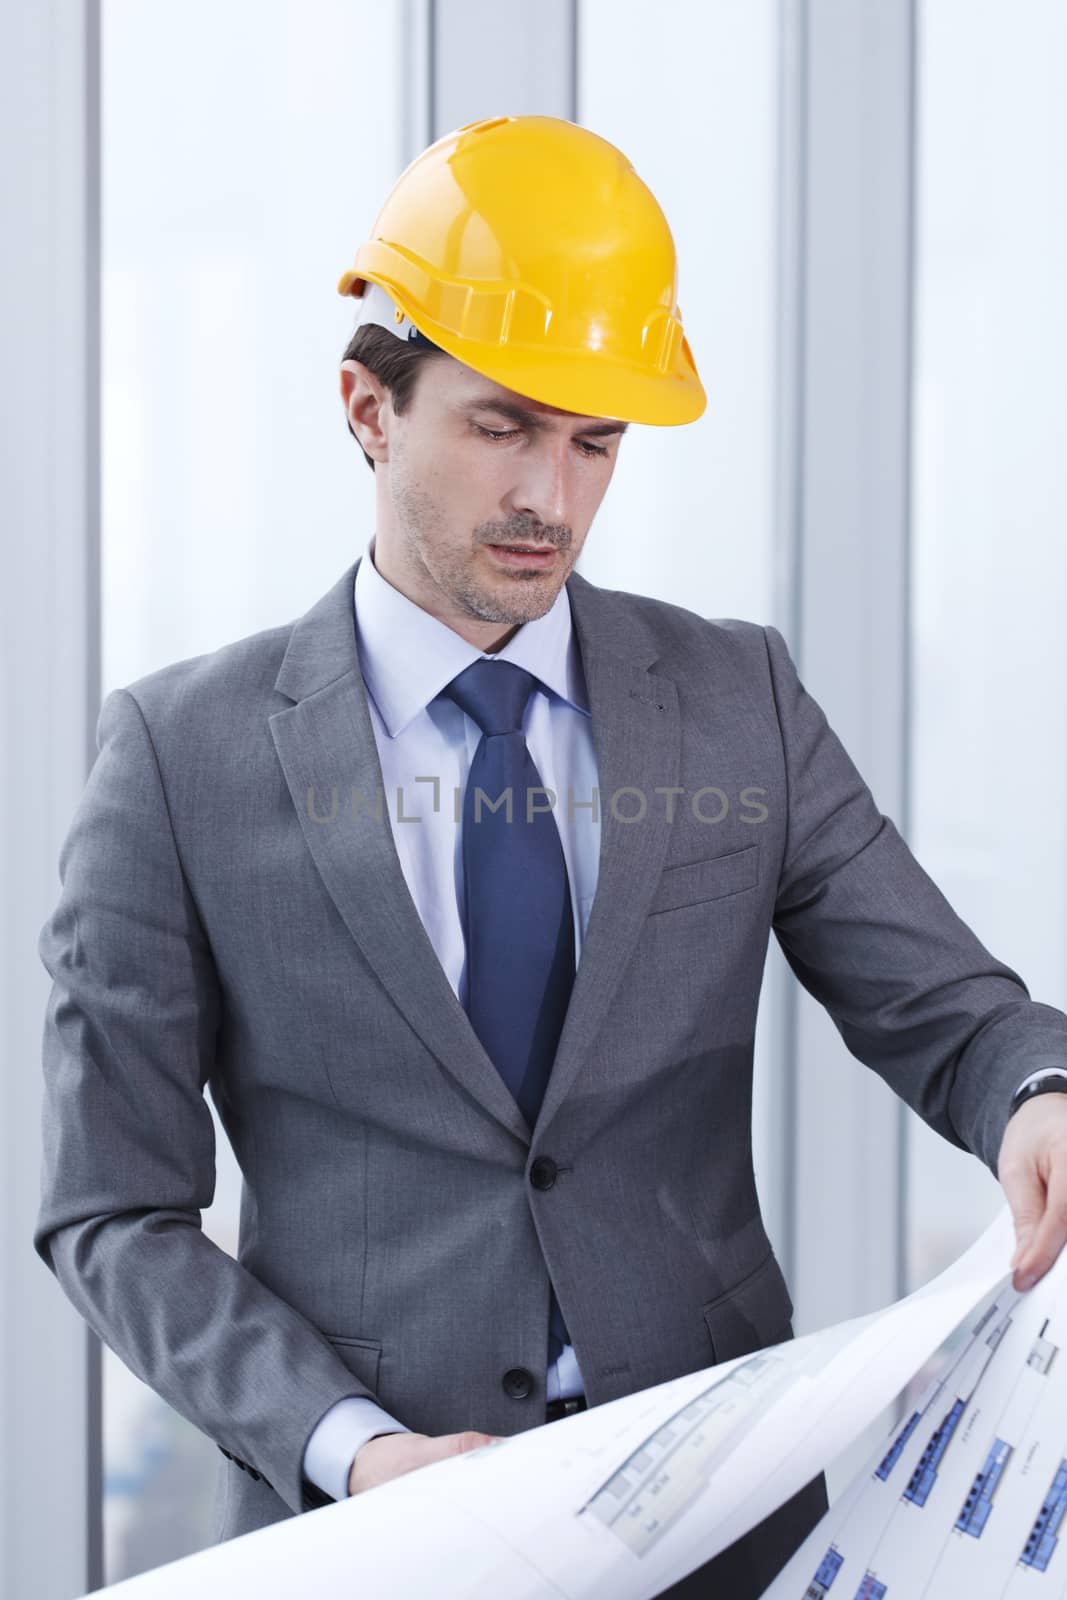 Architector in hardhat  by ALotOfPeople